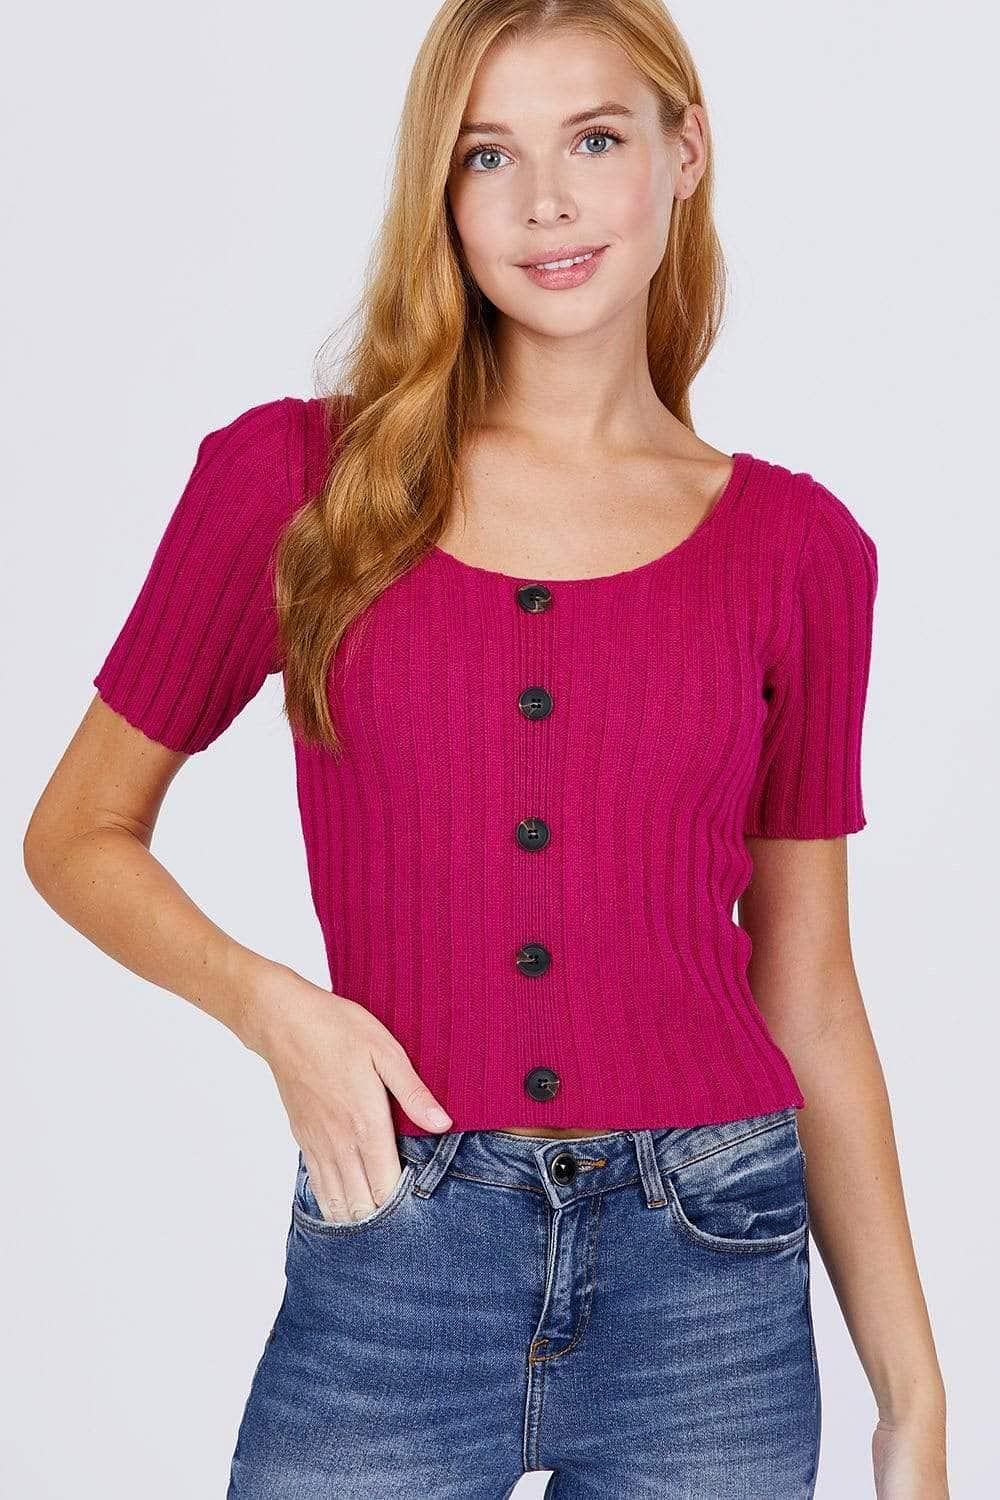 Fuchsia Short Sleeve Rib Knitted Sweater - Shopping Therapy, LLC Top